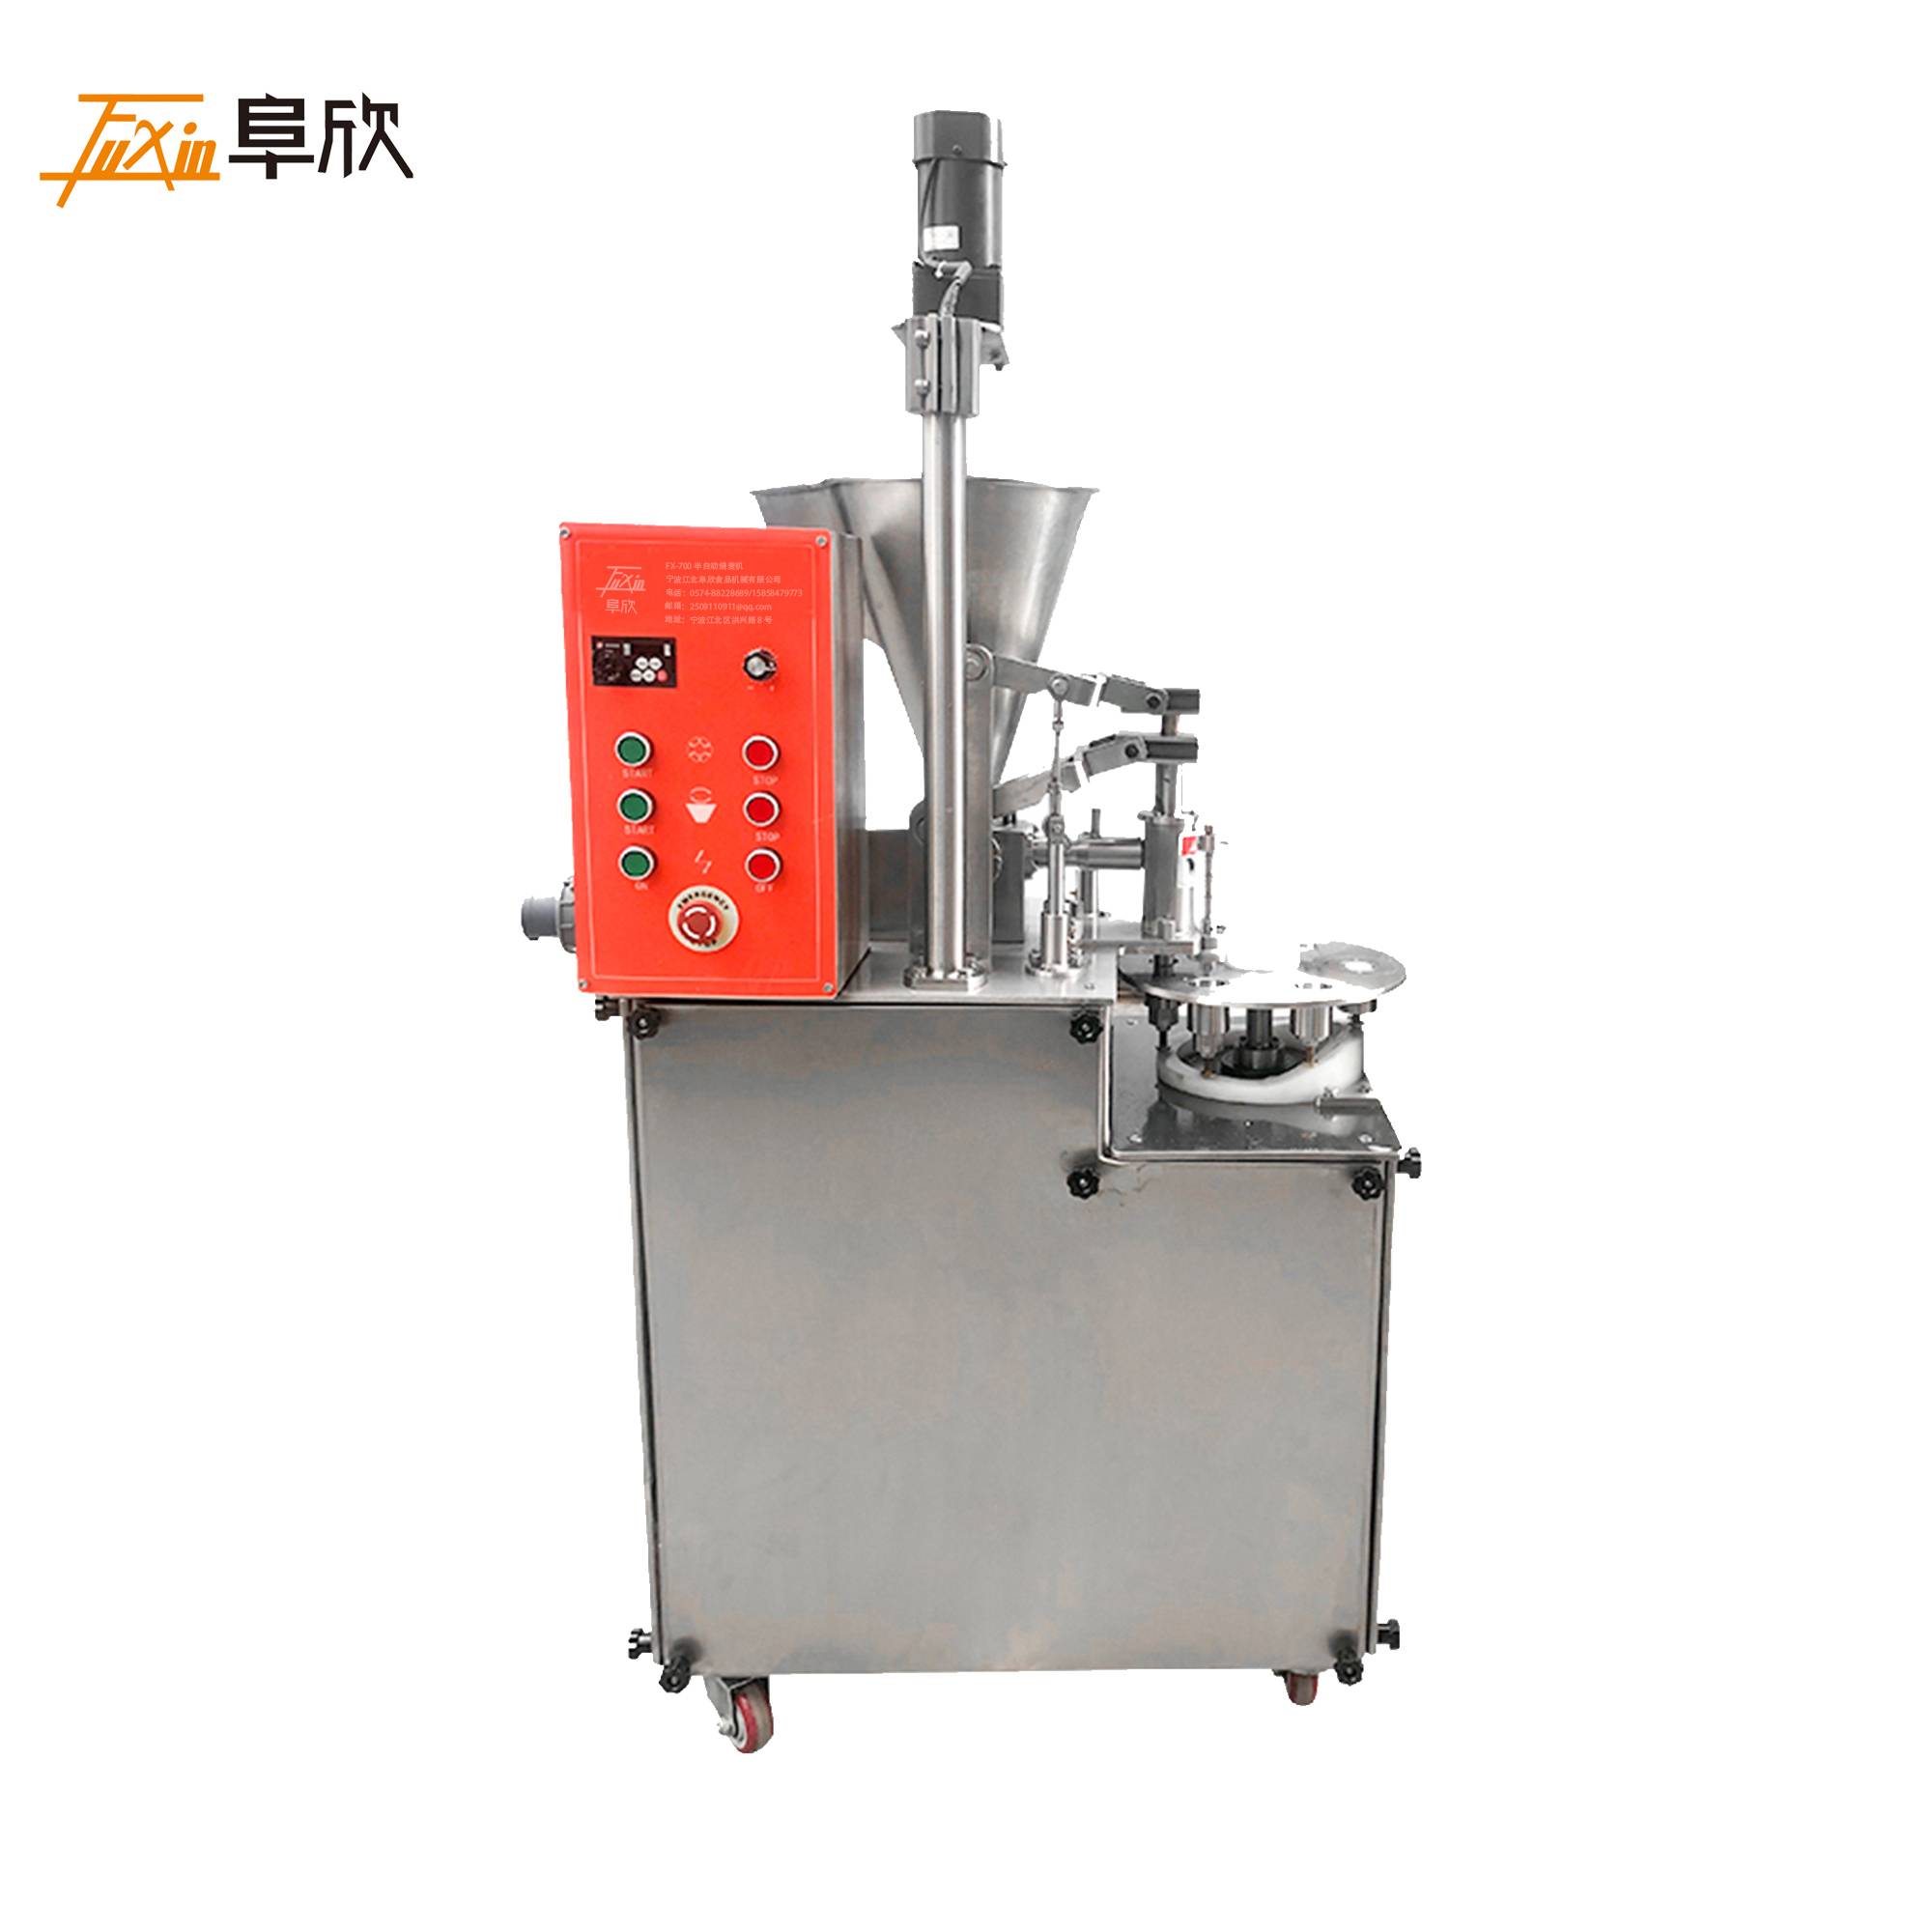 China New Product Large Commericial Siomay Machine -
 FX-700A SEMI-AUTOMATIC SIOMAI/SIOMAY/SHUMAI MAKING MACHINE – Fuxin